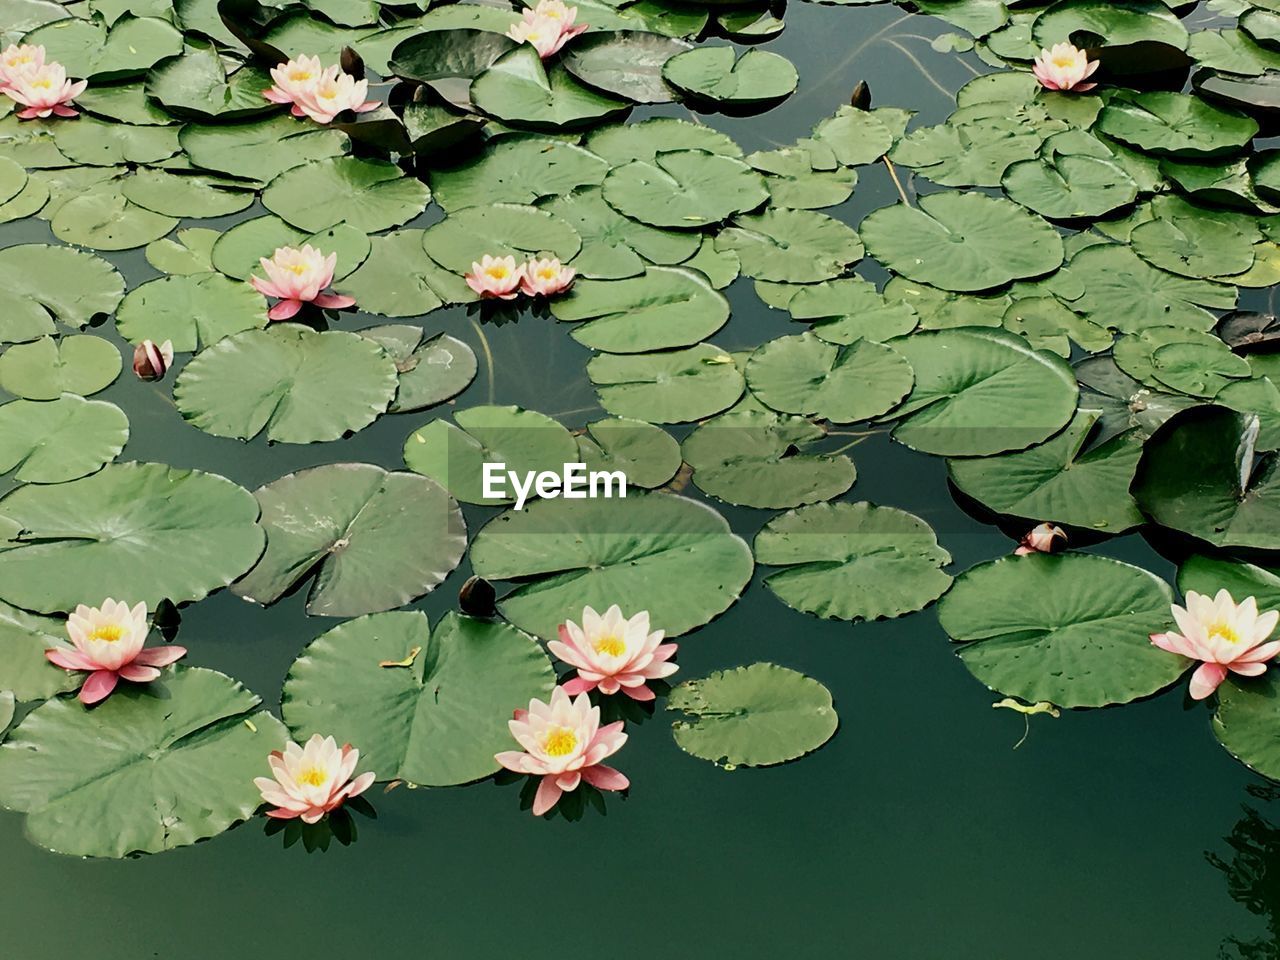 HIGH ANGLE VIEW OF WATER LILY ON LEAVES